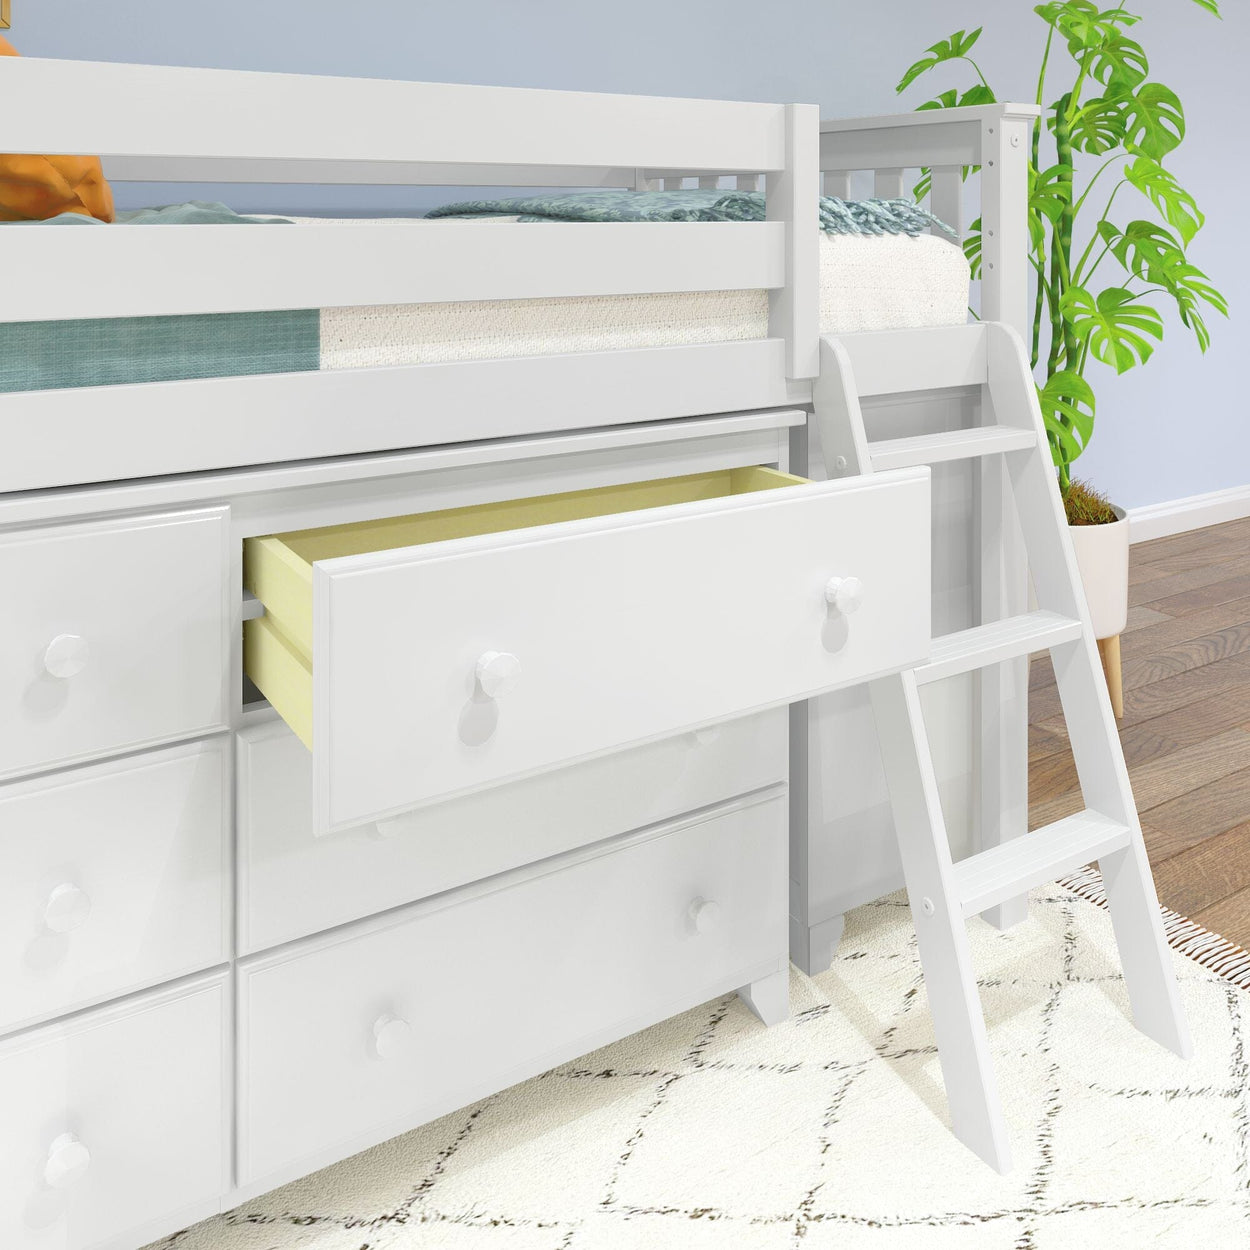 18-3D6D-002 : Loft Beds Twin-Size Low Loft with 3-Drawer and 6-Drawer Dressers, White